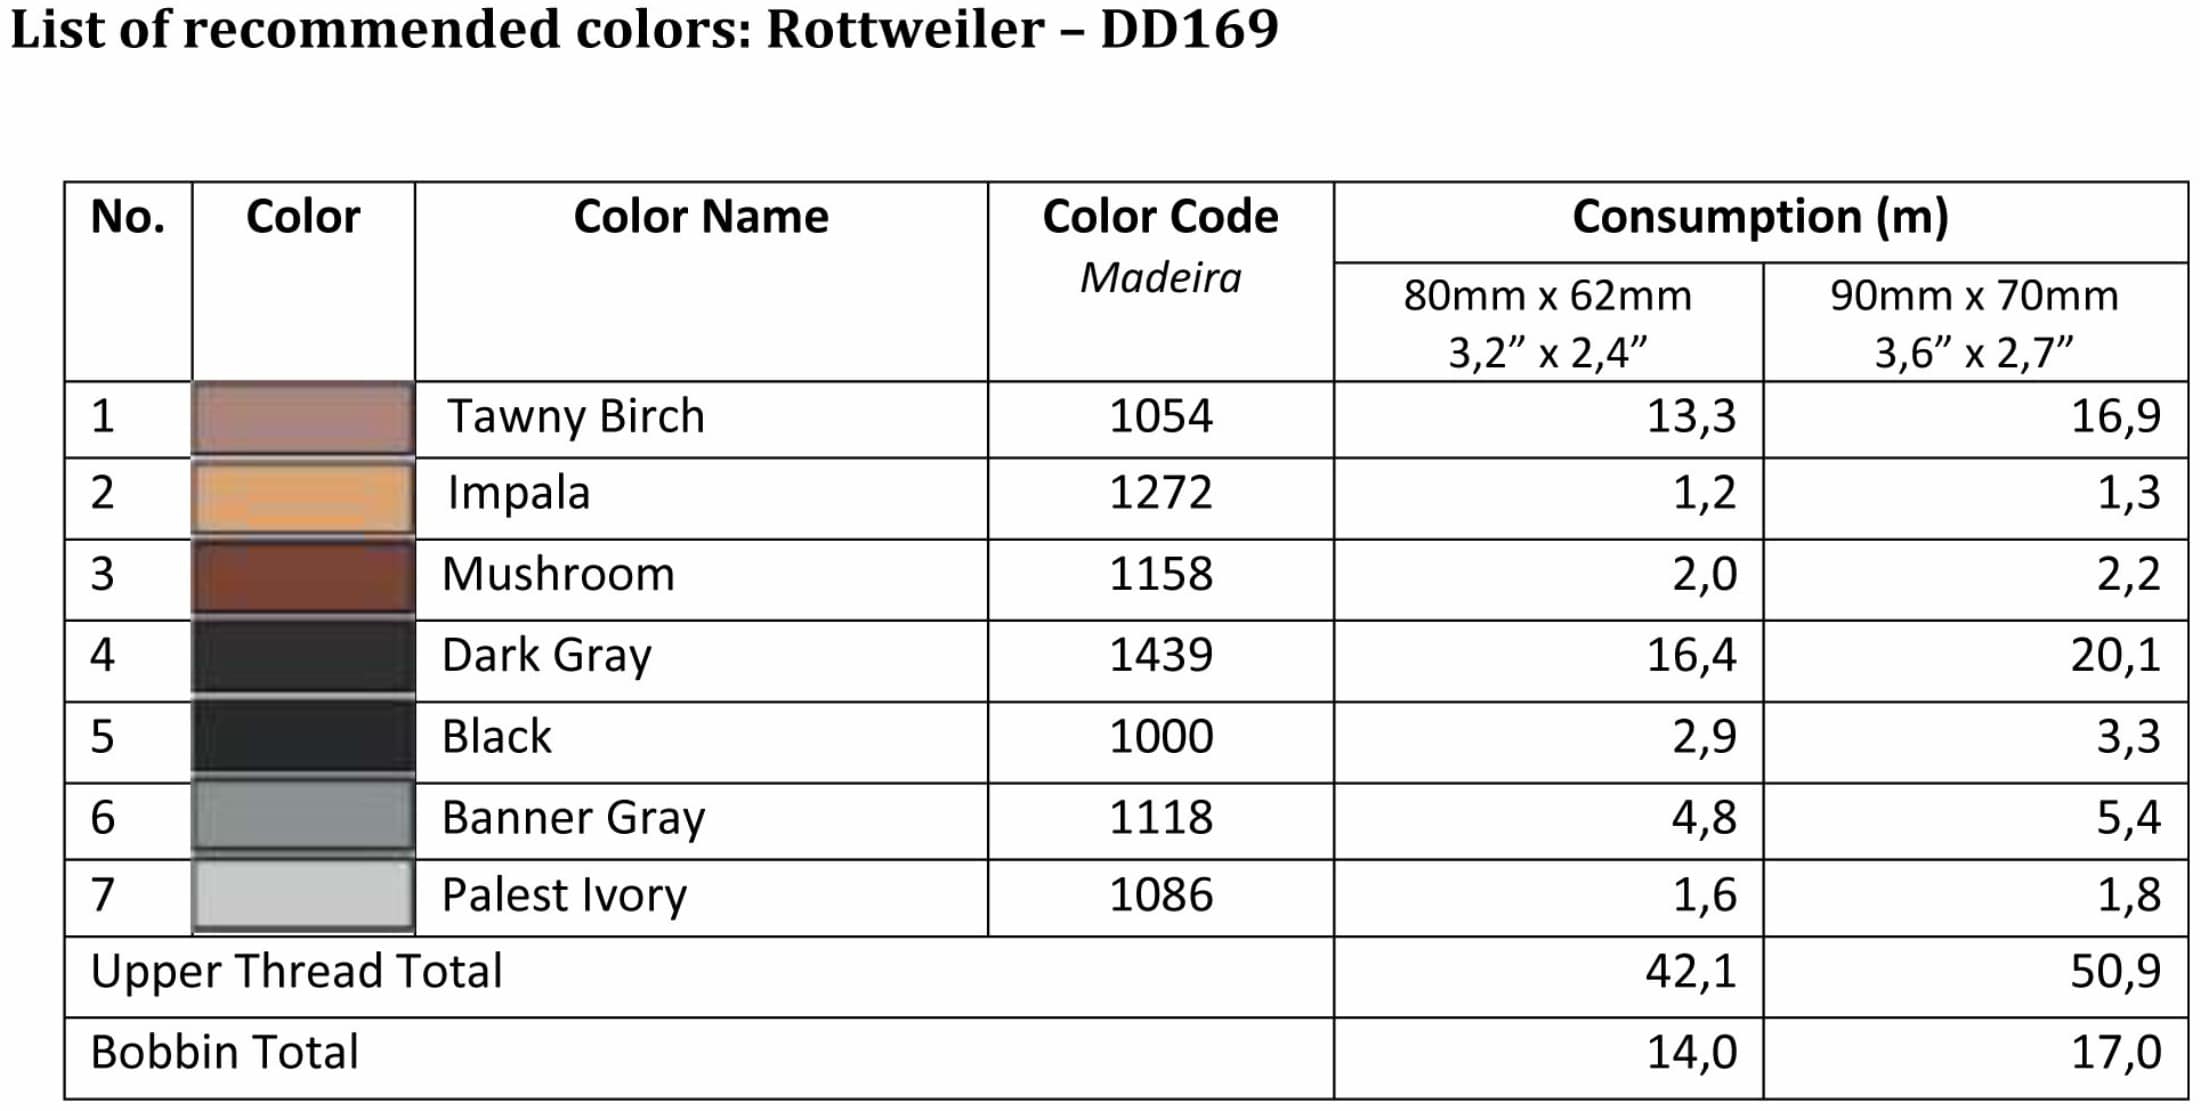 List of recommended colors - DD169